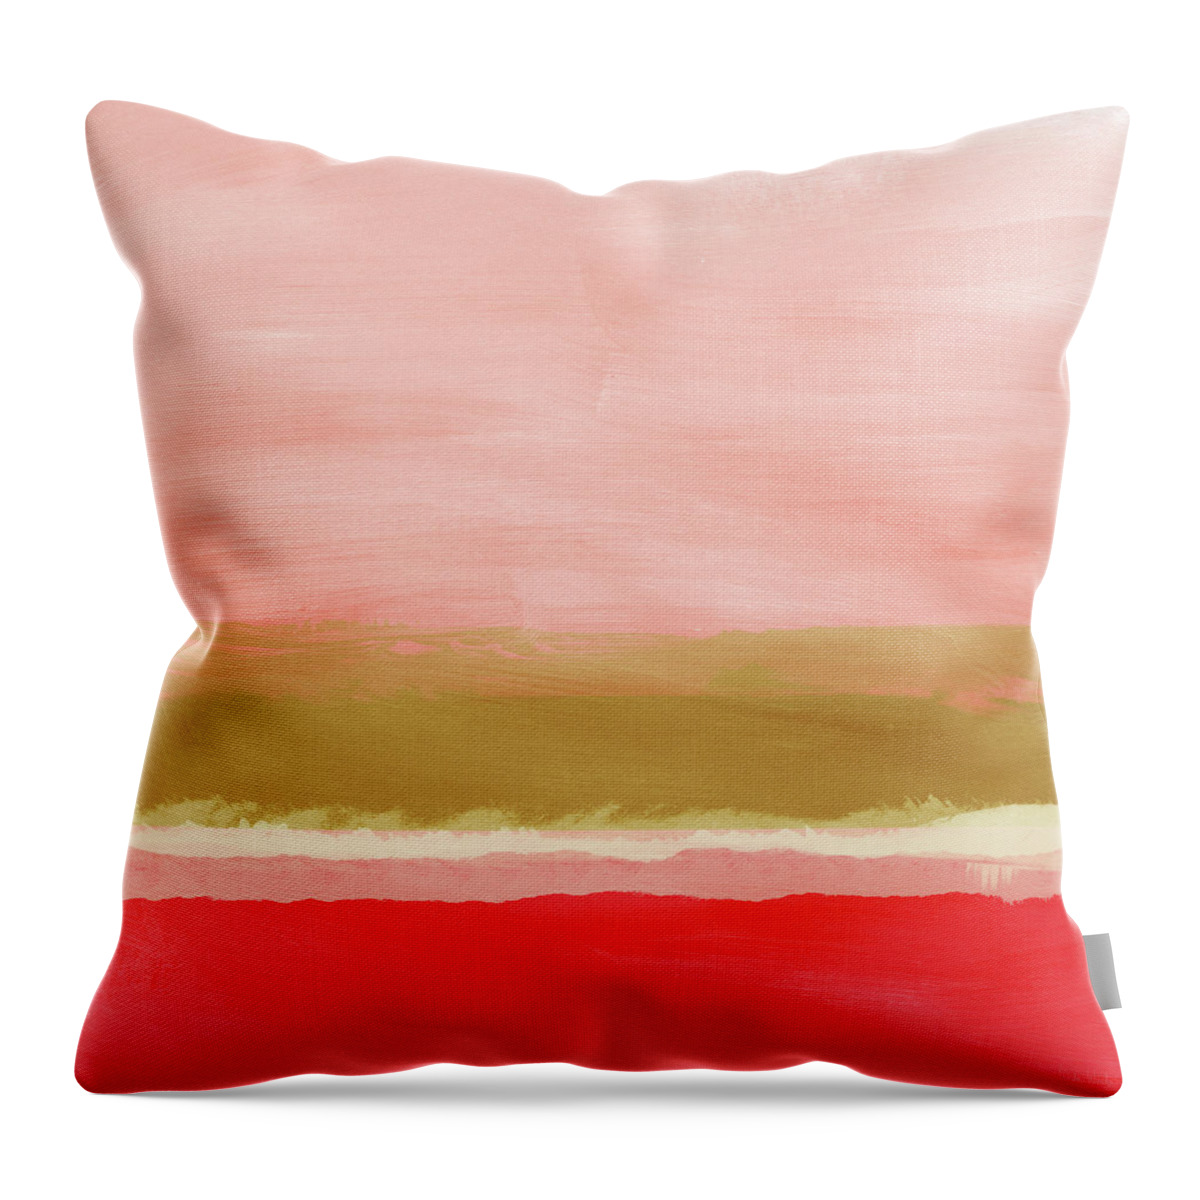 Landscape Throw Pillow featuring the mixed media Coral and Gold Landscape- Art by Linda Woods by Linda Woods